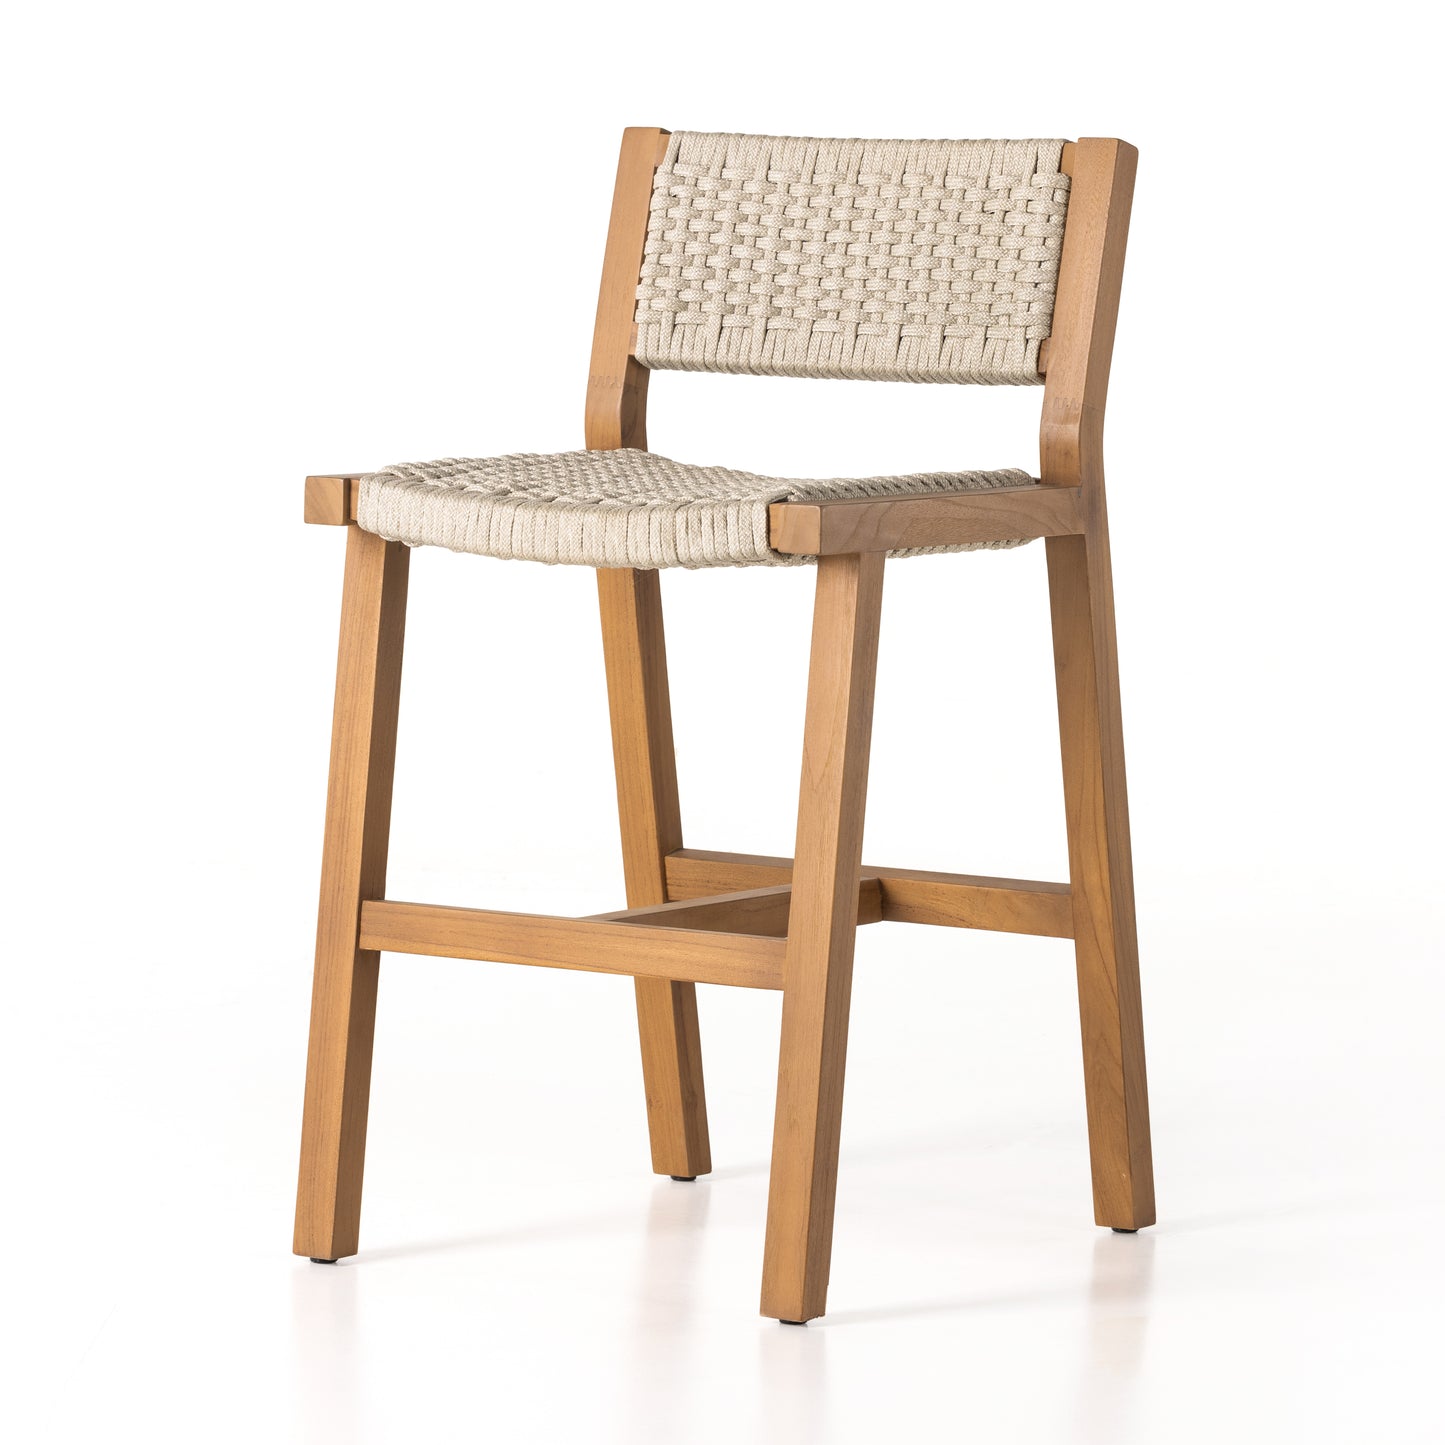 Delano Outdoor Bar + Counter Stool Counter / Natural TeakBAR AND COUNTER STOOL Four Hands  Counter Natural Teak  Four Hands, Mid Century Modern Furniture, Old Bones Furniture Company, Old Bones Co, Modern Mid Century, Designer Furniture, https://www.oldbonesco.com/